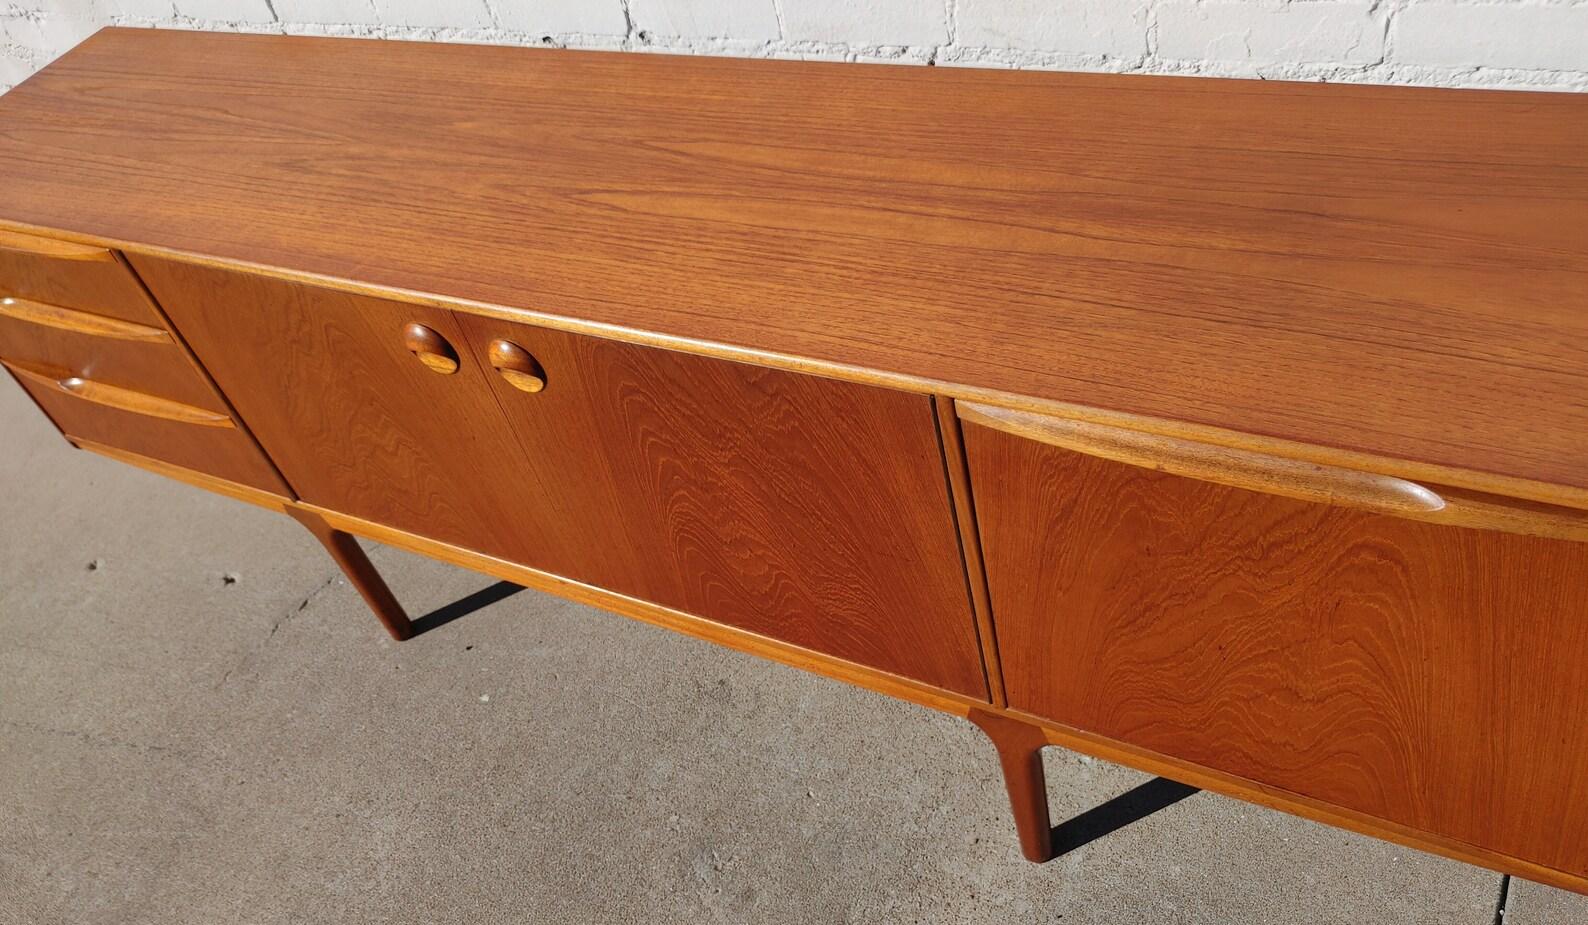 Mid Century English Modern Teak Sideboard by McIntosh

Average vintage condition and structurally sound. Has some expected finish wear, scratching, and discoloration. Top has been refinished and does not have original factory finish. Outdoor listing